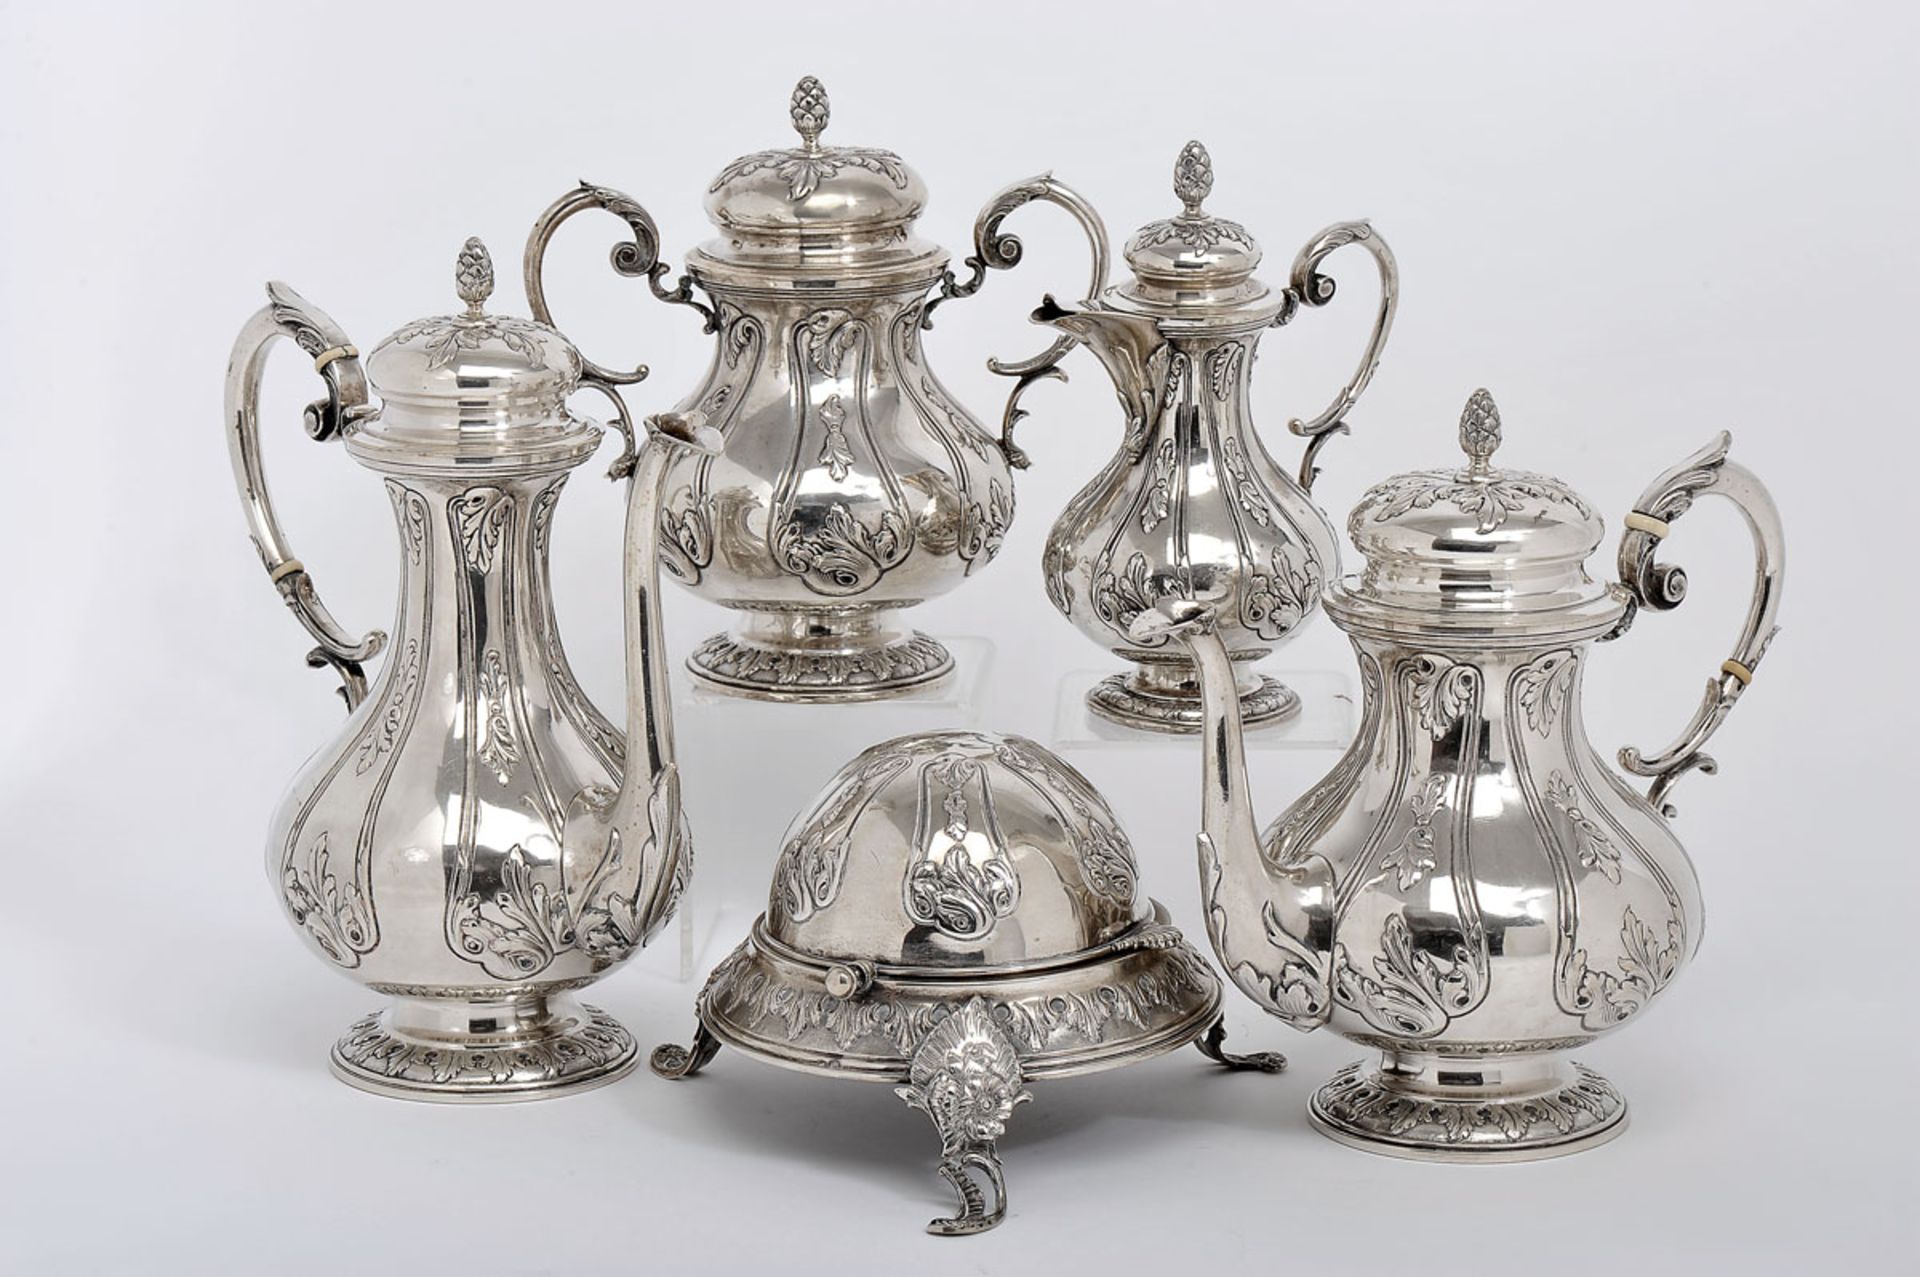 A Tea and Coffee Set, 833/1000 silver, decoration en relief, consisting of a teapot, a coffee pot, a